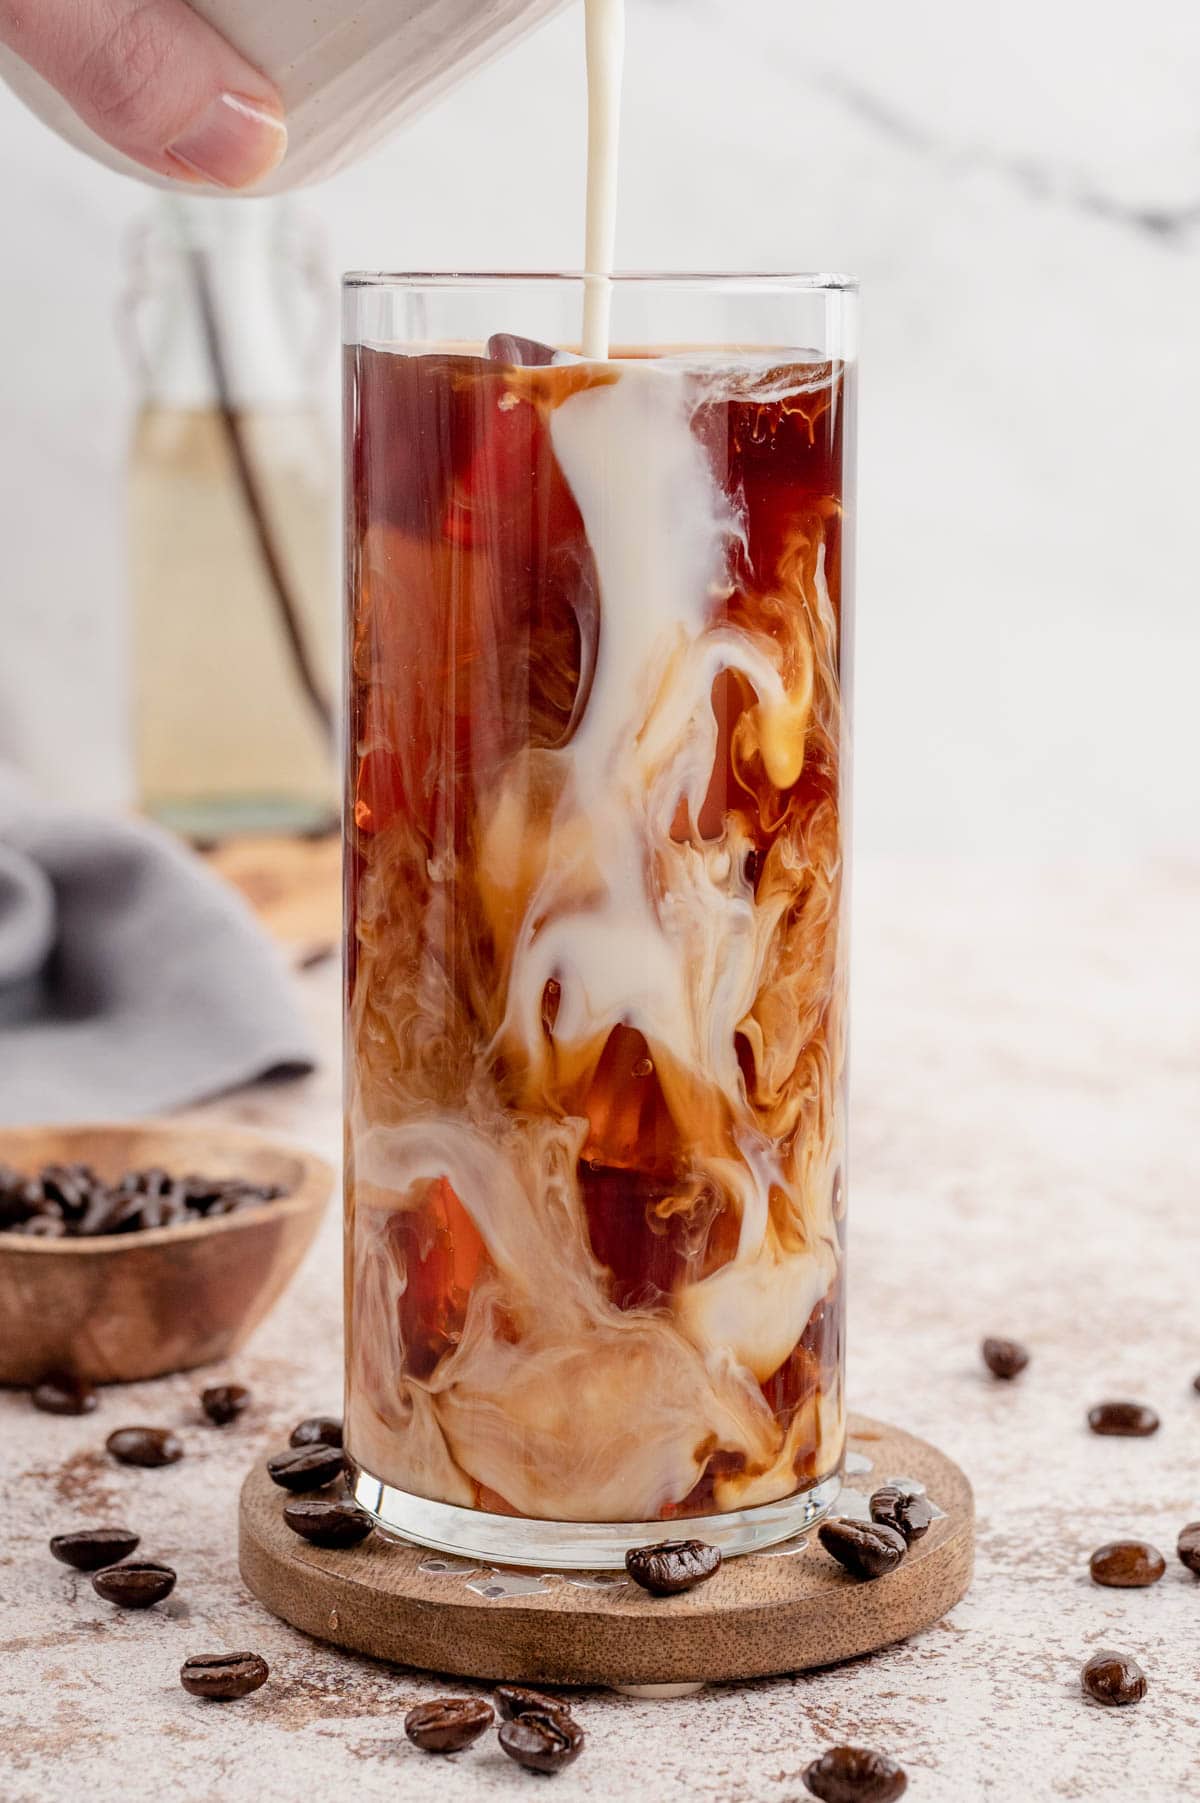 Milk being poured into a glass with beautiful swirls of coffee and cream over iced cubes.